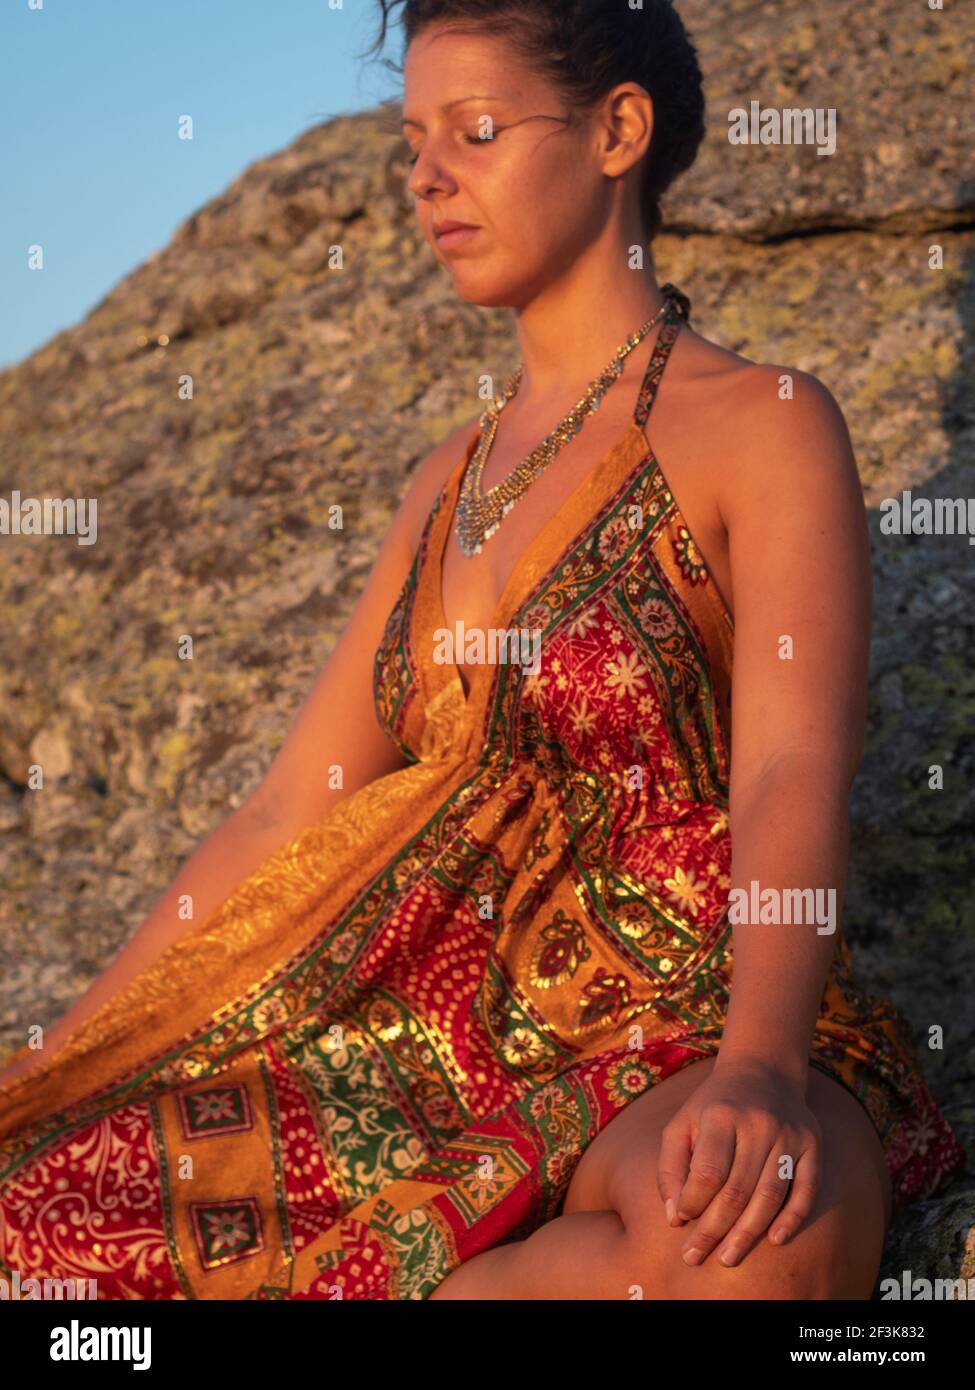 Female with orange silk dress in deep meditating breathing calmly in the  sunset Stock Photo - Alamy